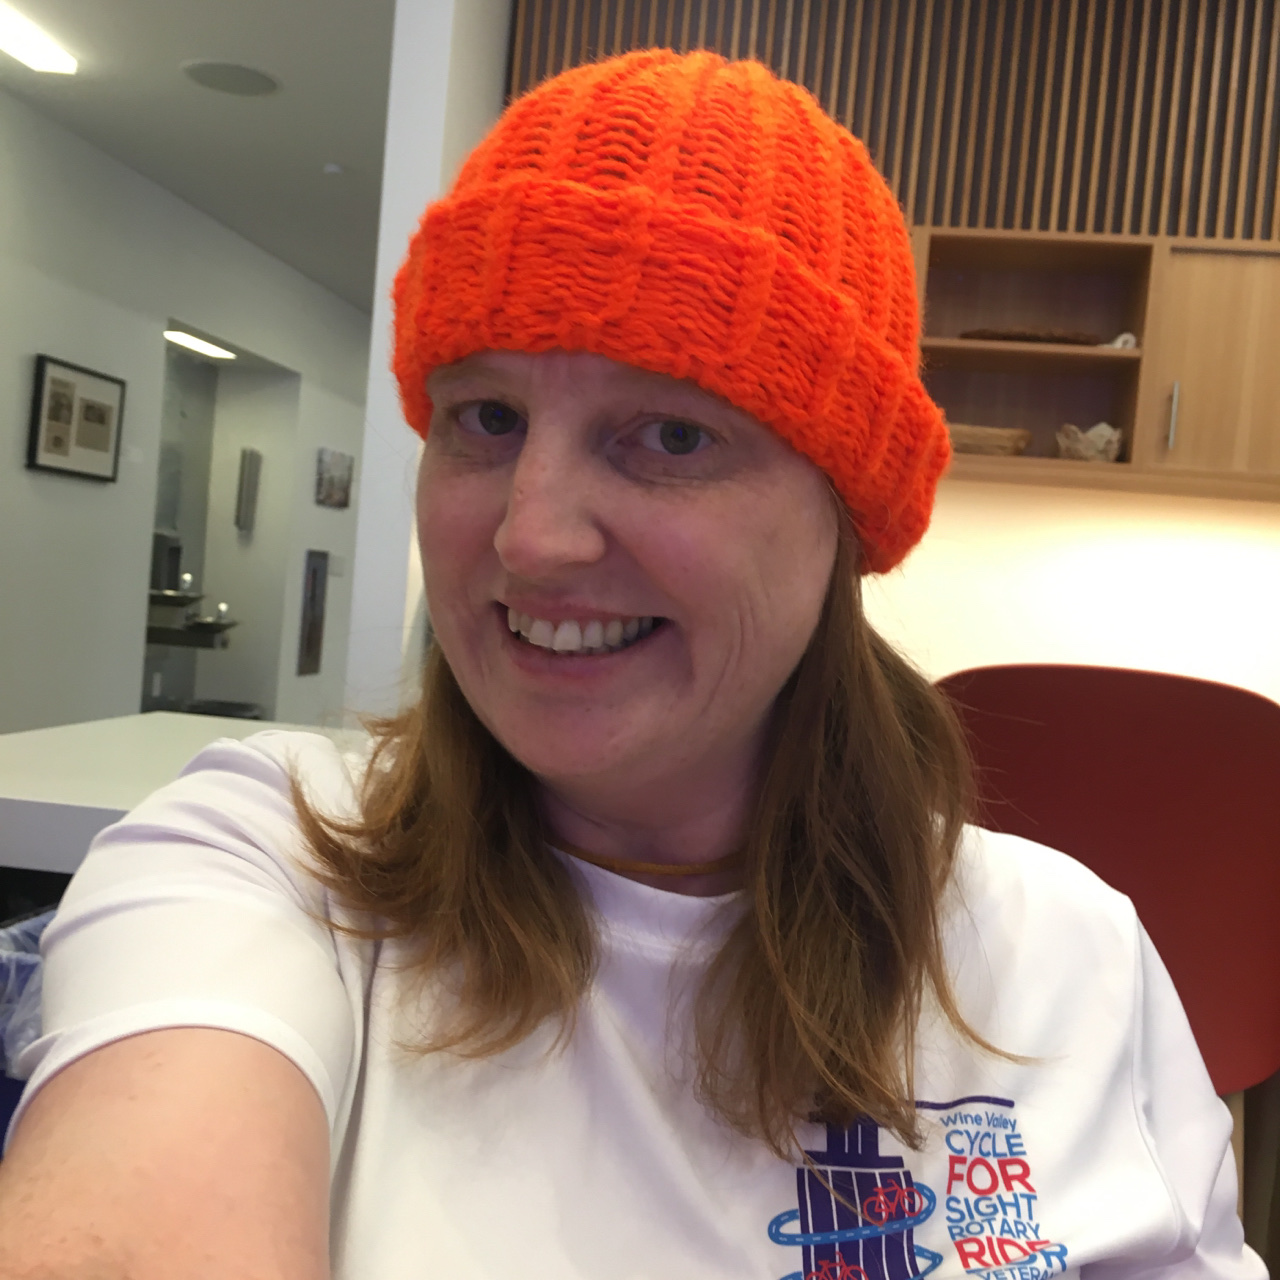 Serena smiles for a selfie sporting her new orange beanie.